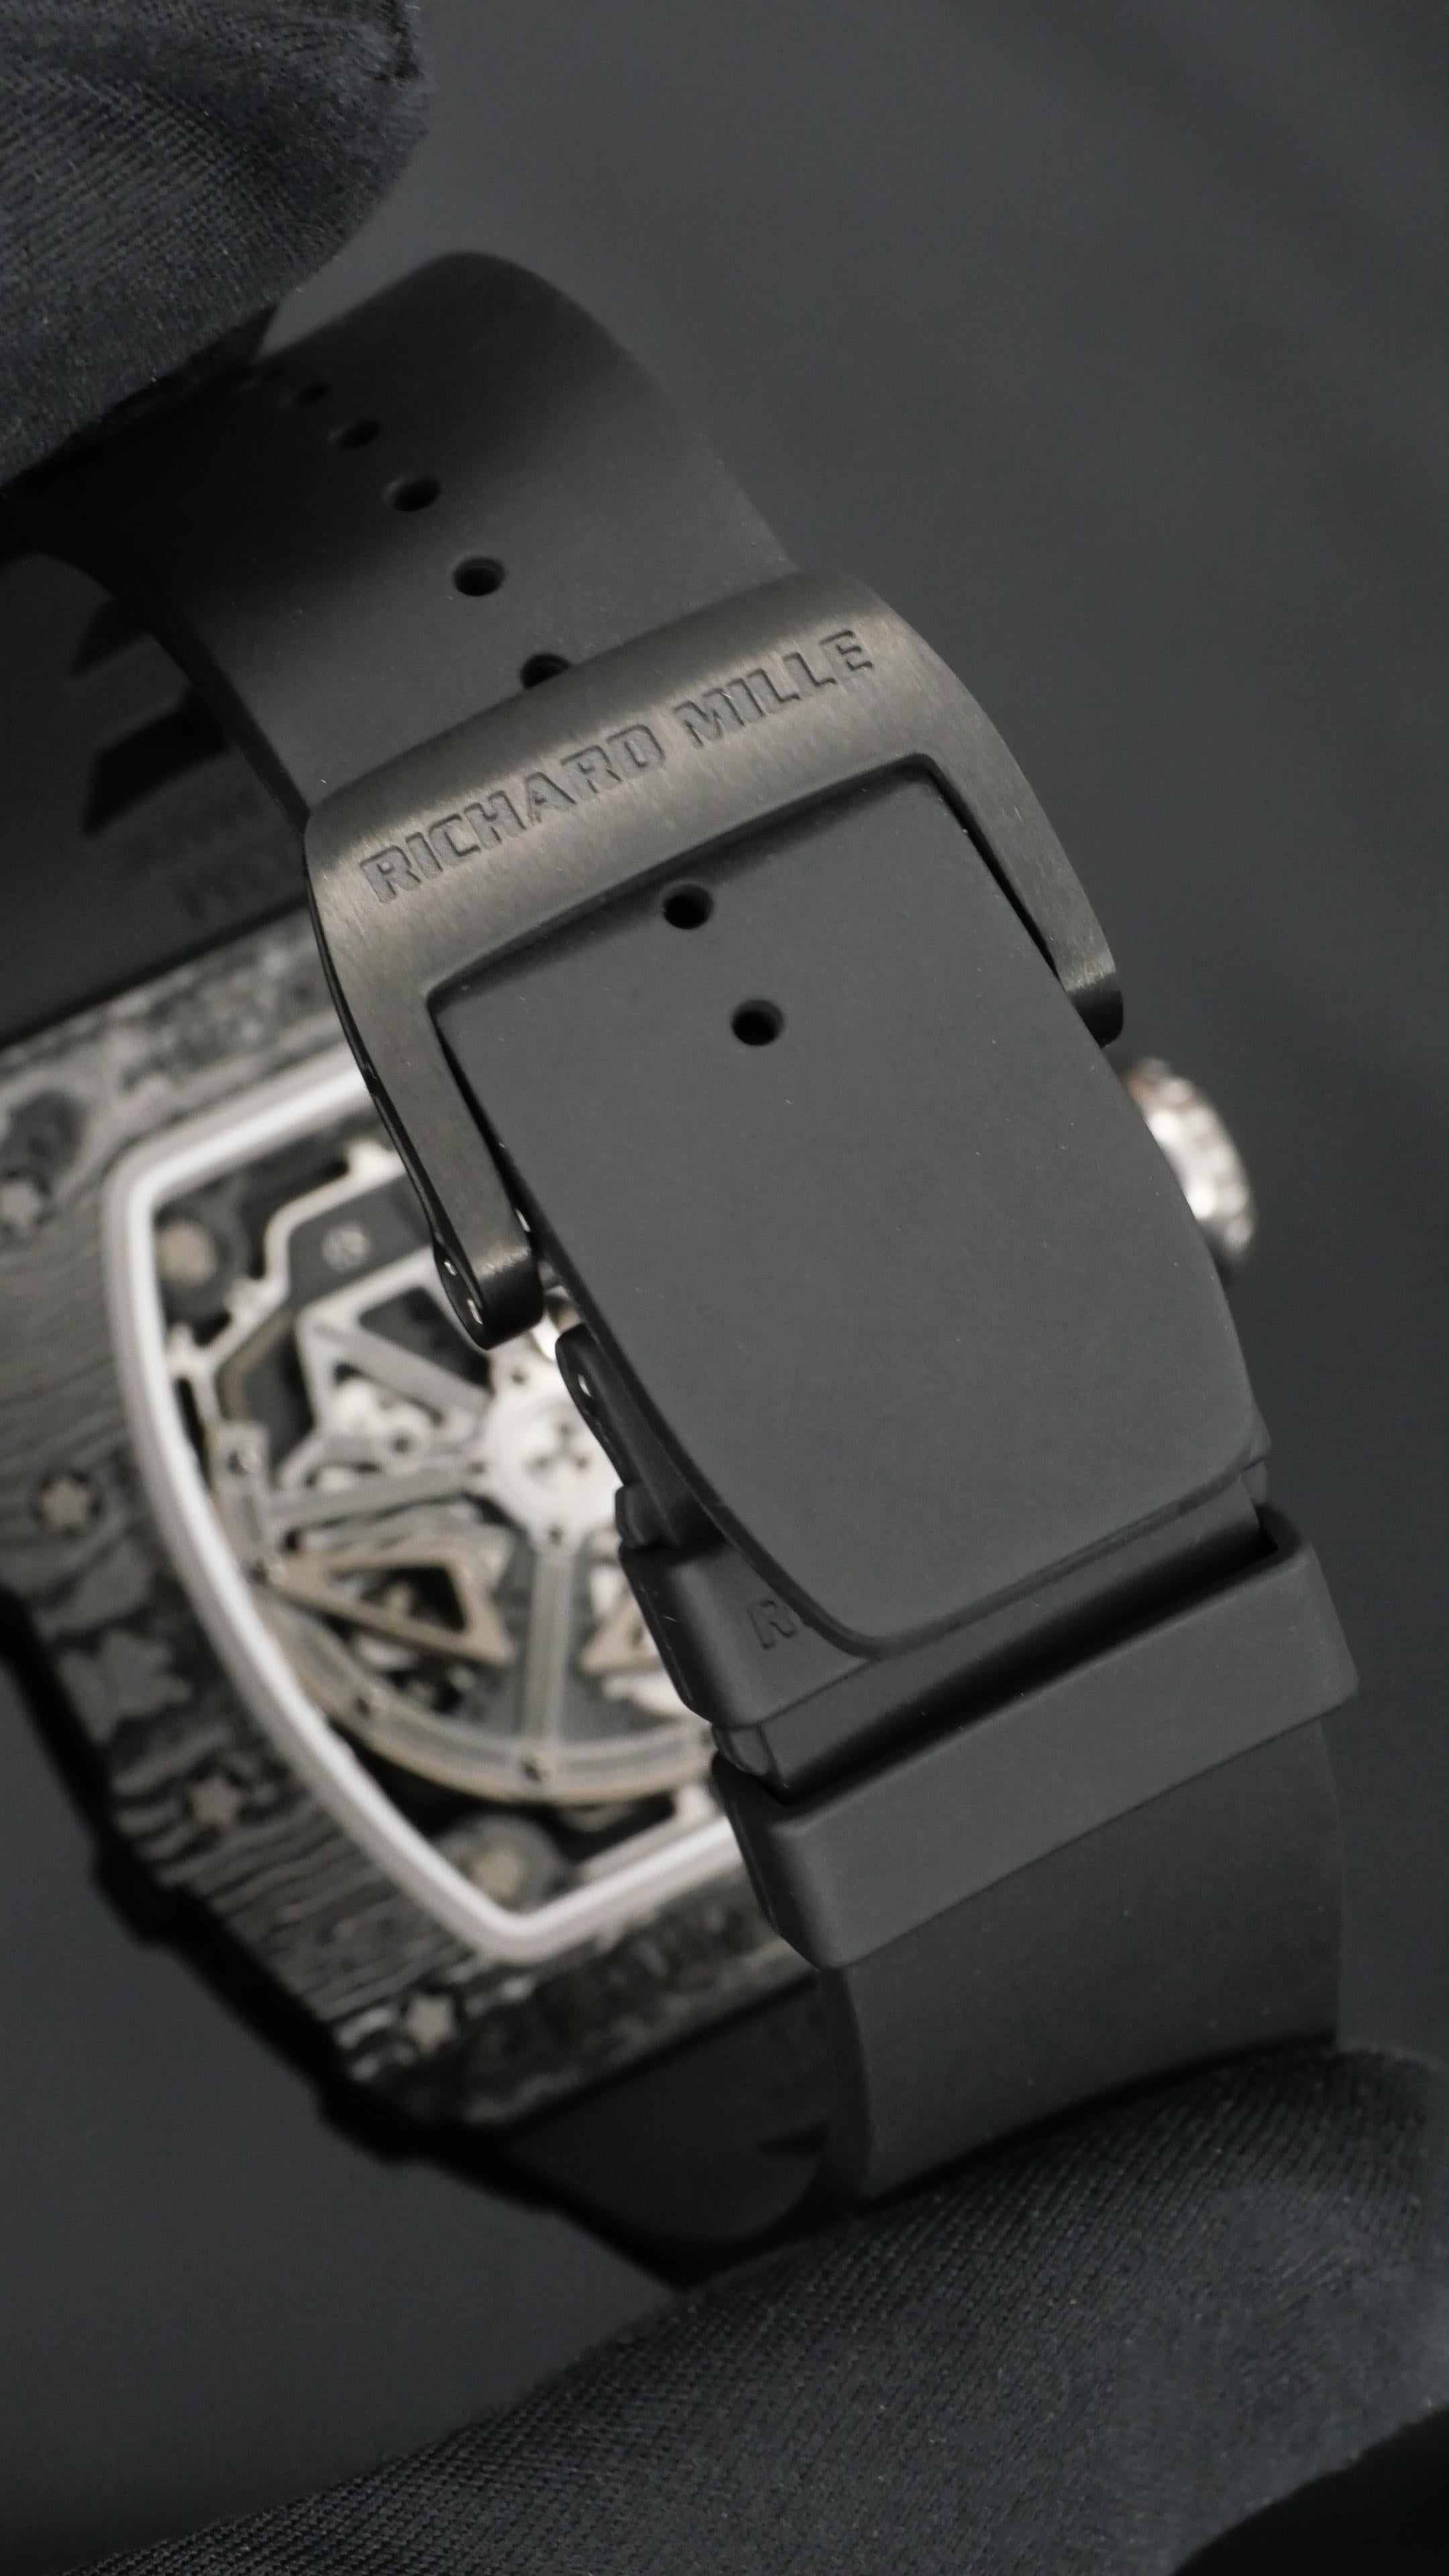 Richard Mille RM 011-03 Flyback Chronograph Automatic Wristwatch For Sale 1